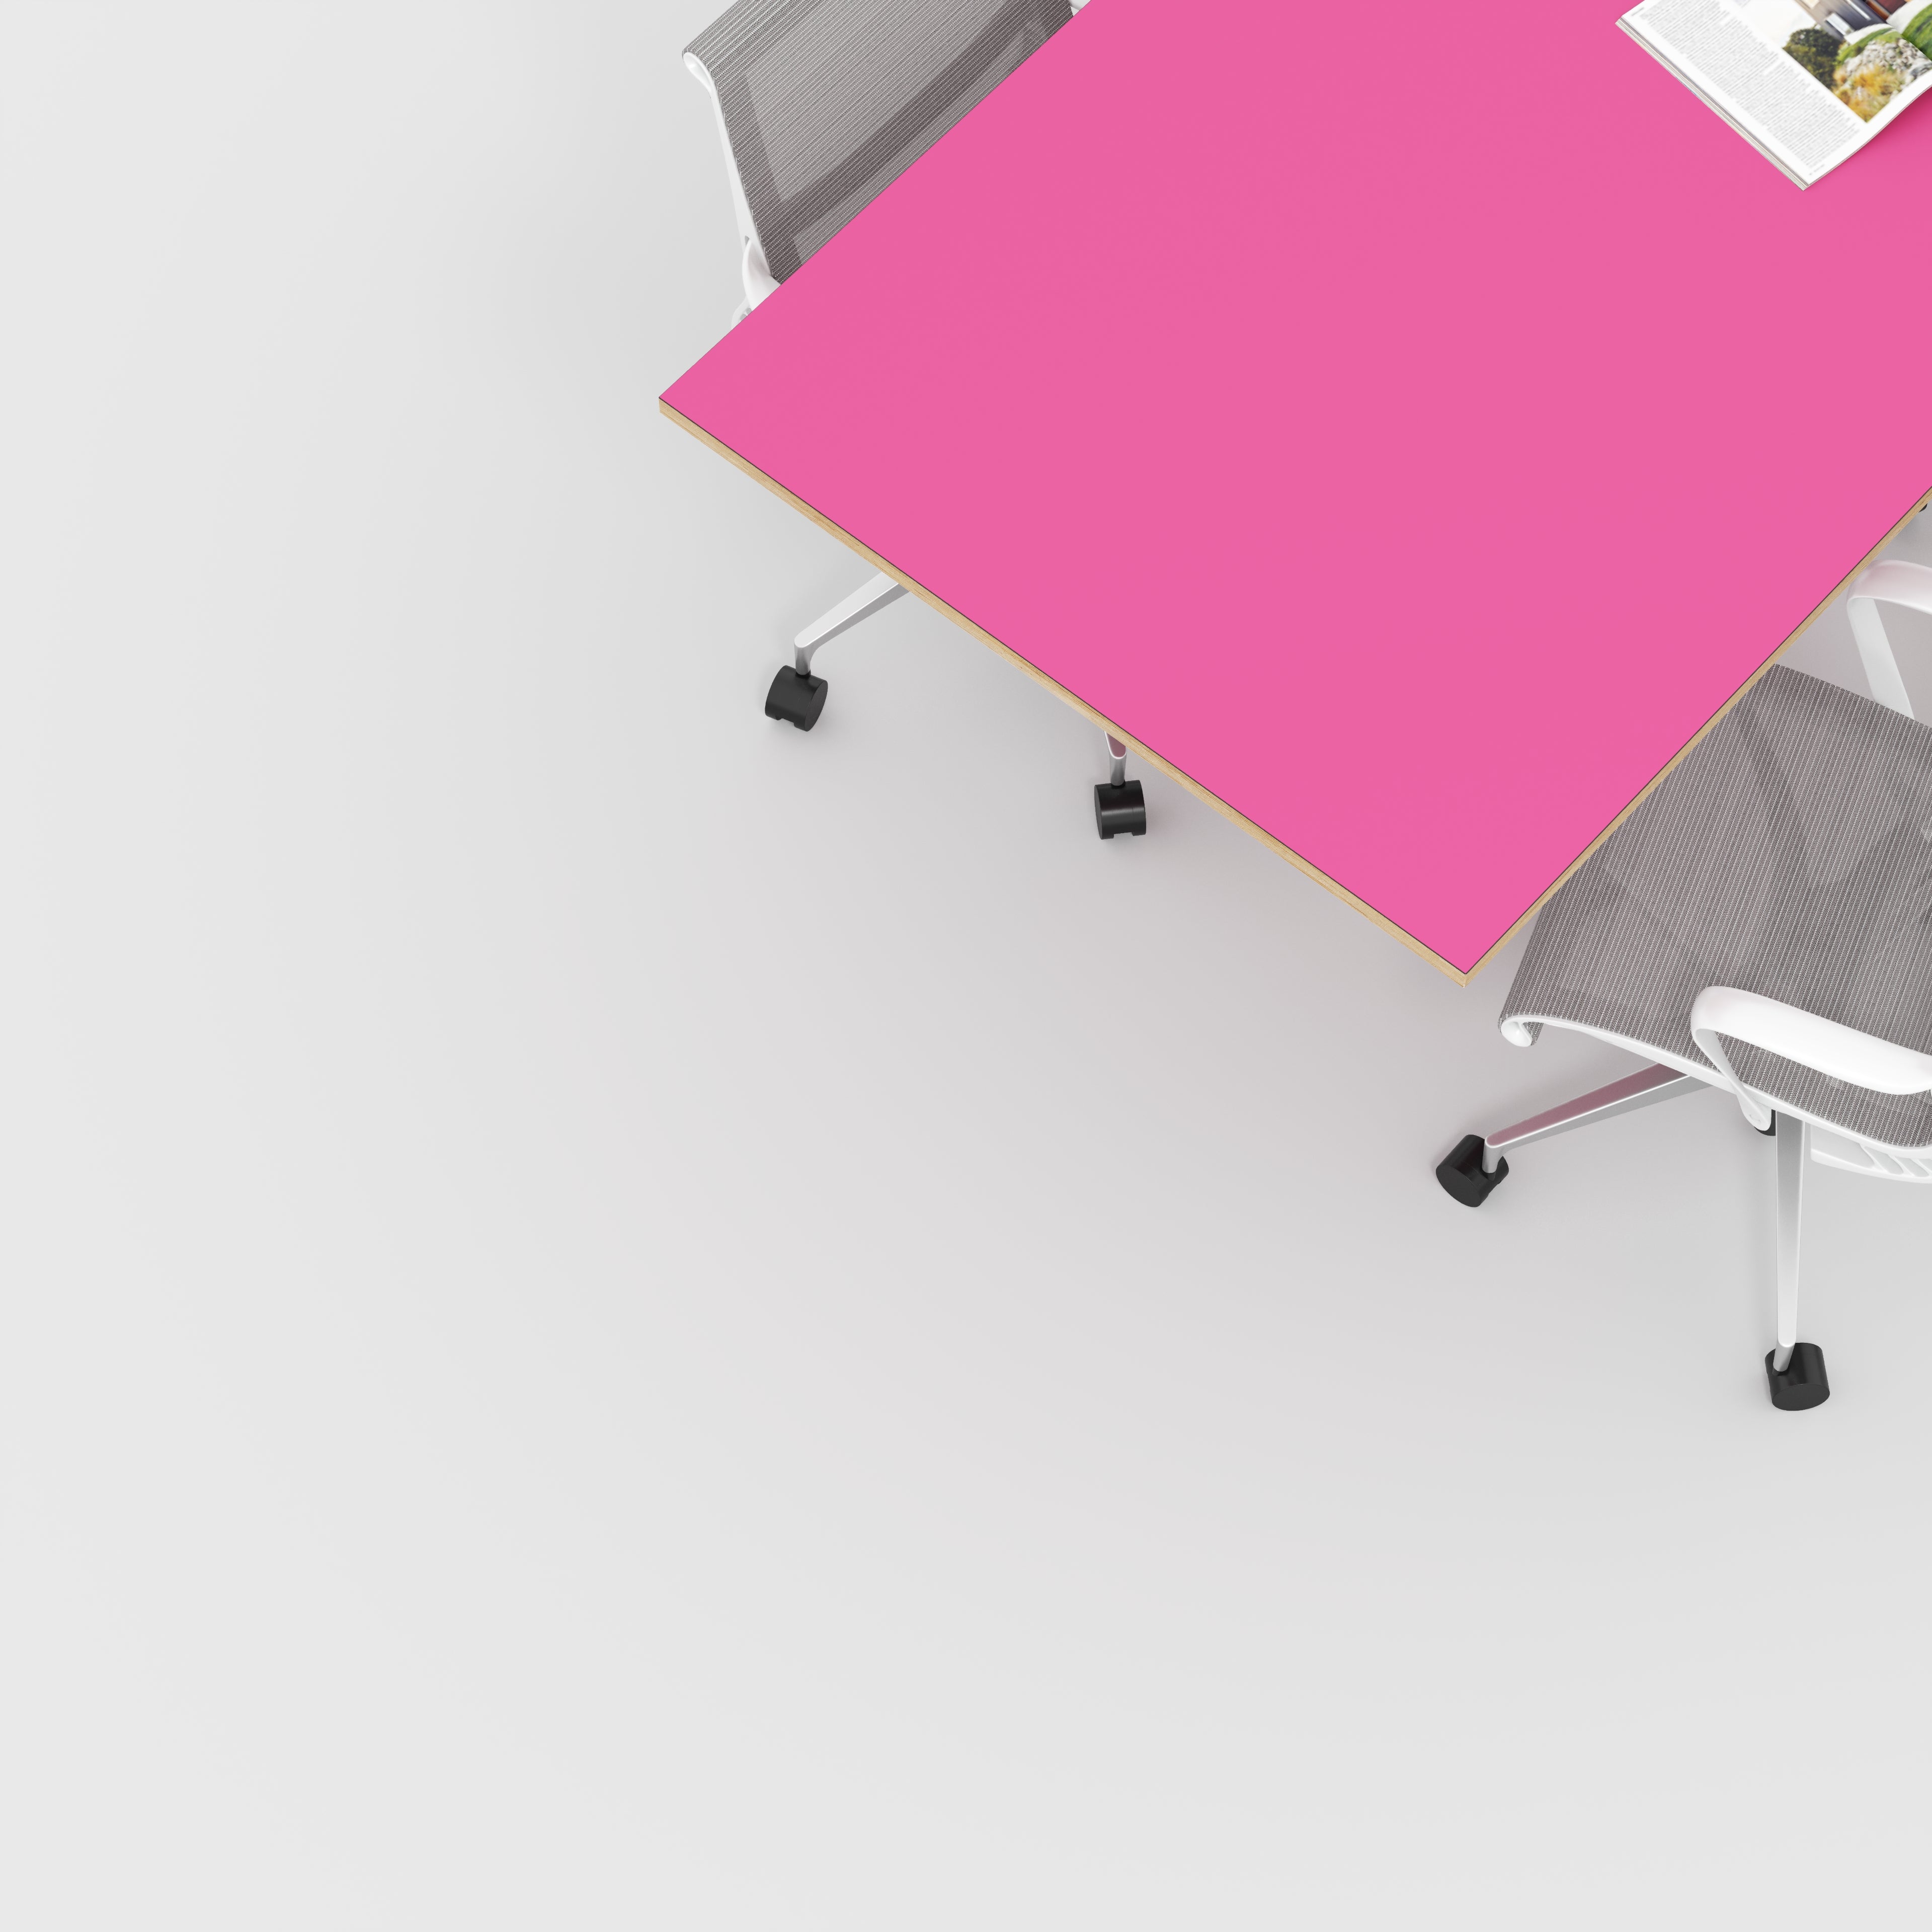 Plywood Tabletop - Formica Juicy Pink - 2000(w) x 1000(d)